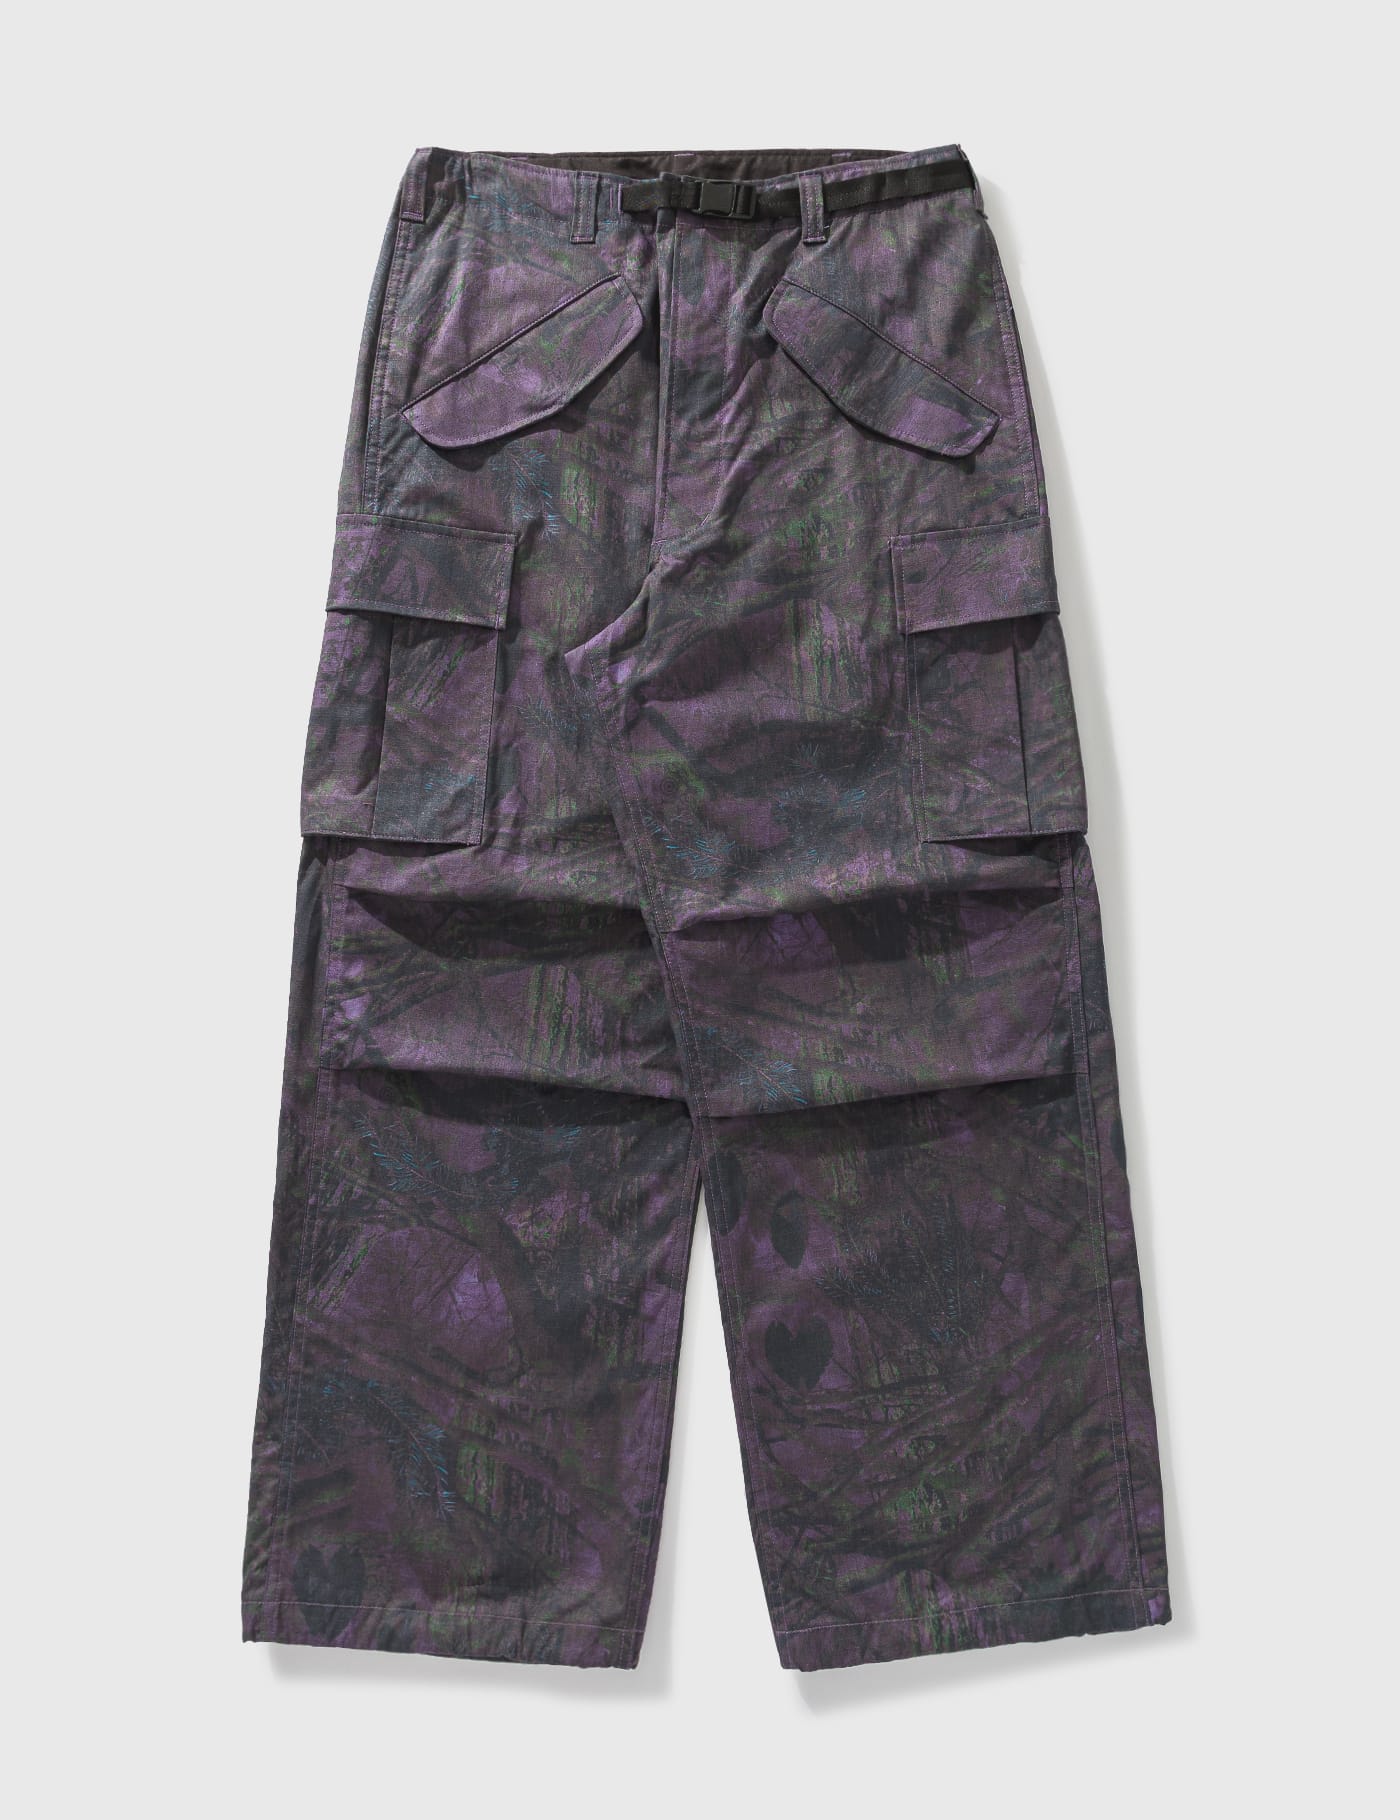 South2 West8 - Belted BDU Pants | HBX - Globally Curated Fashion 